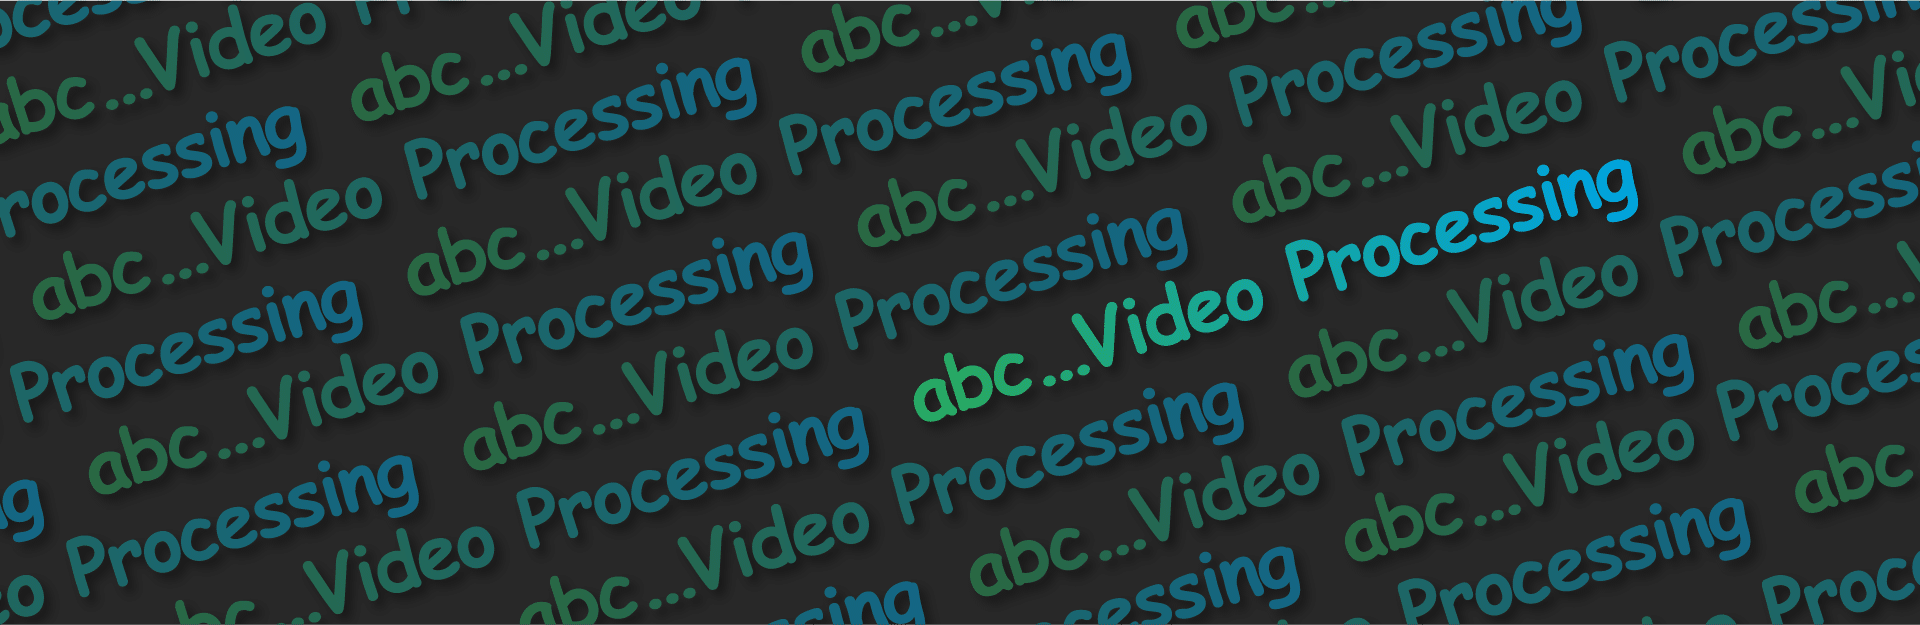 the glossary of video processing